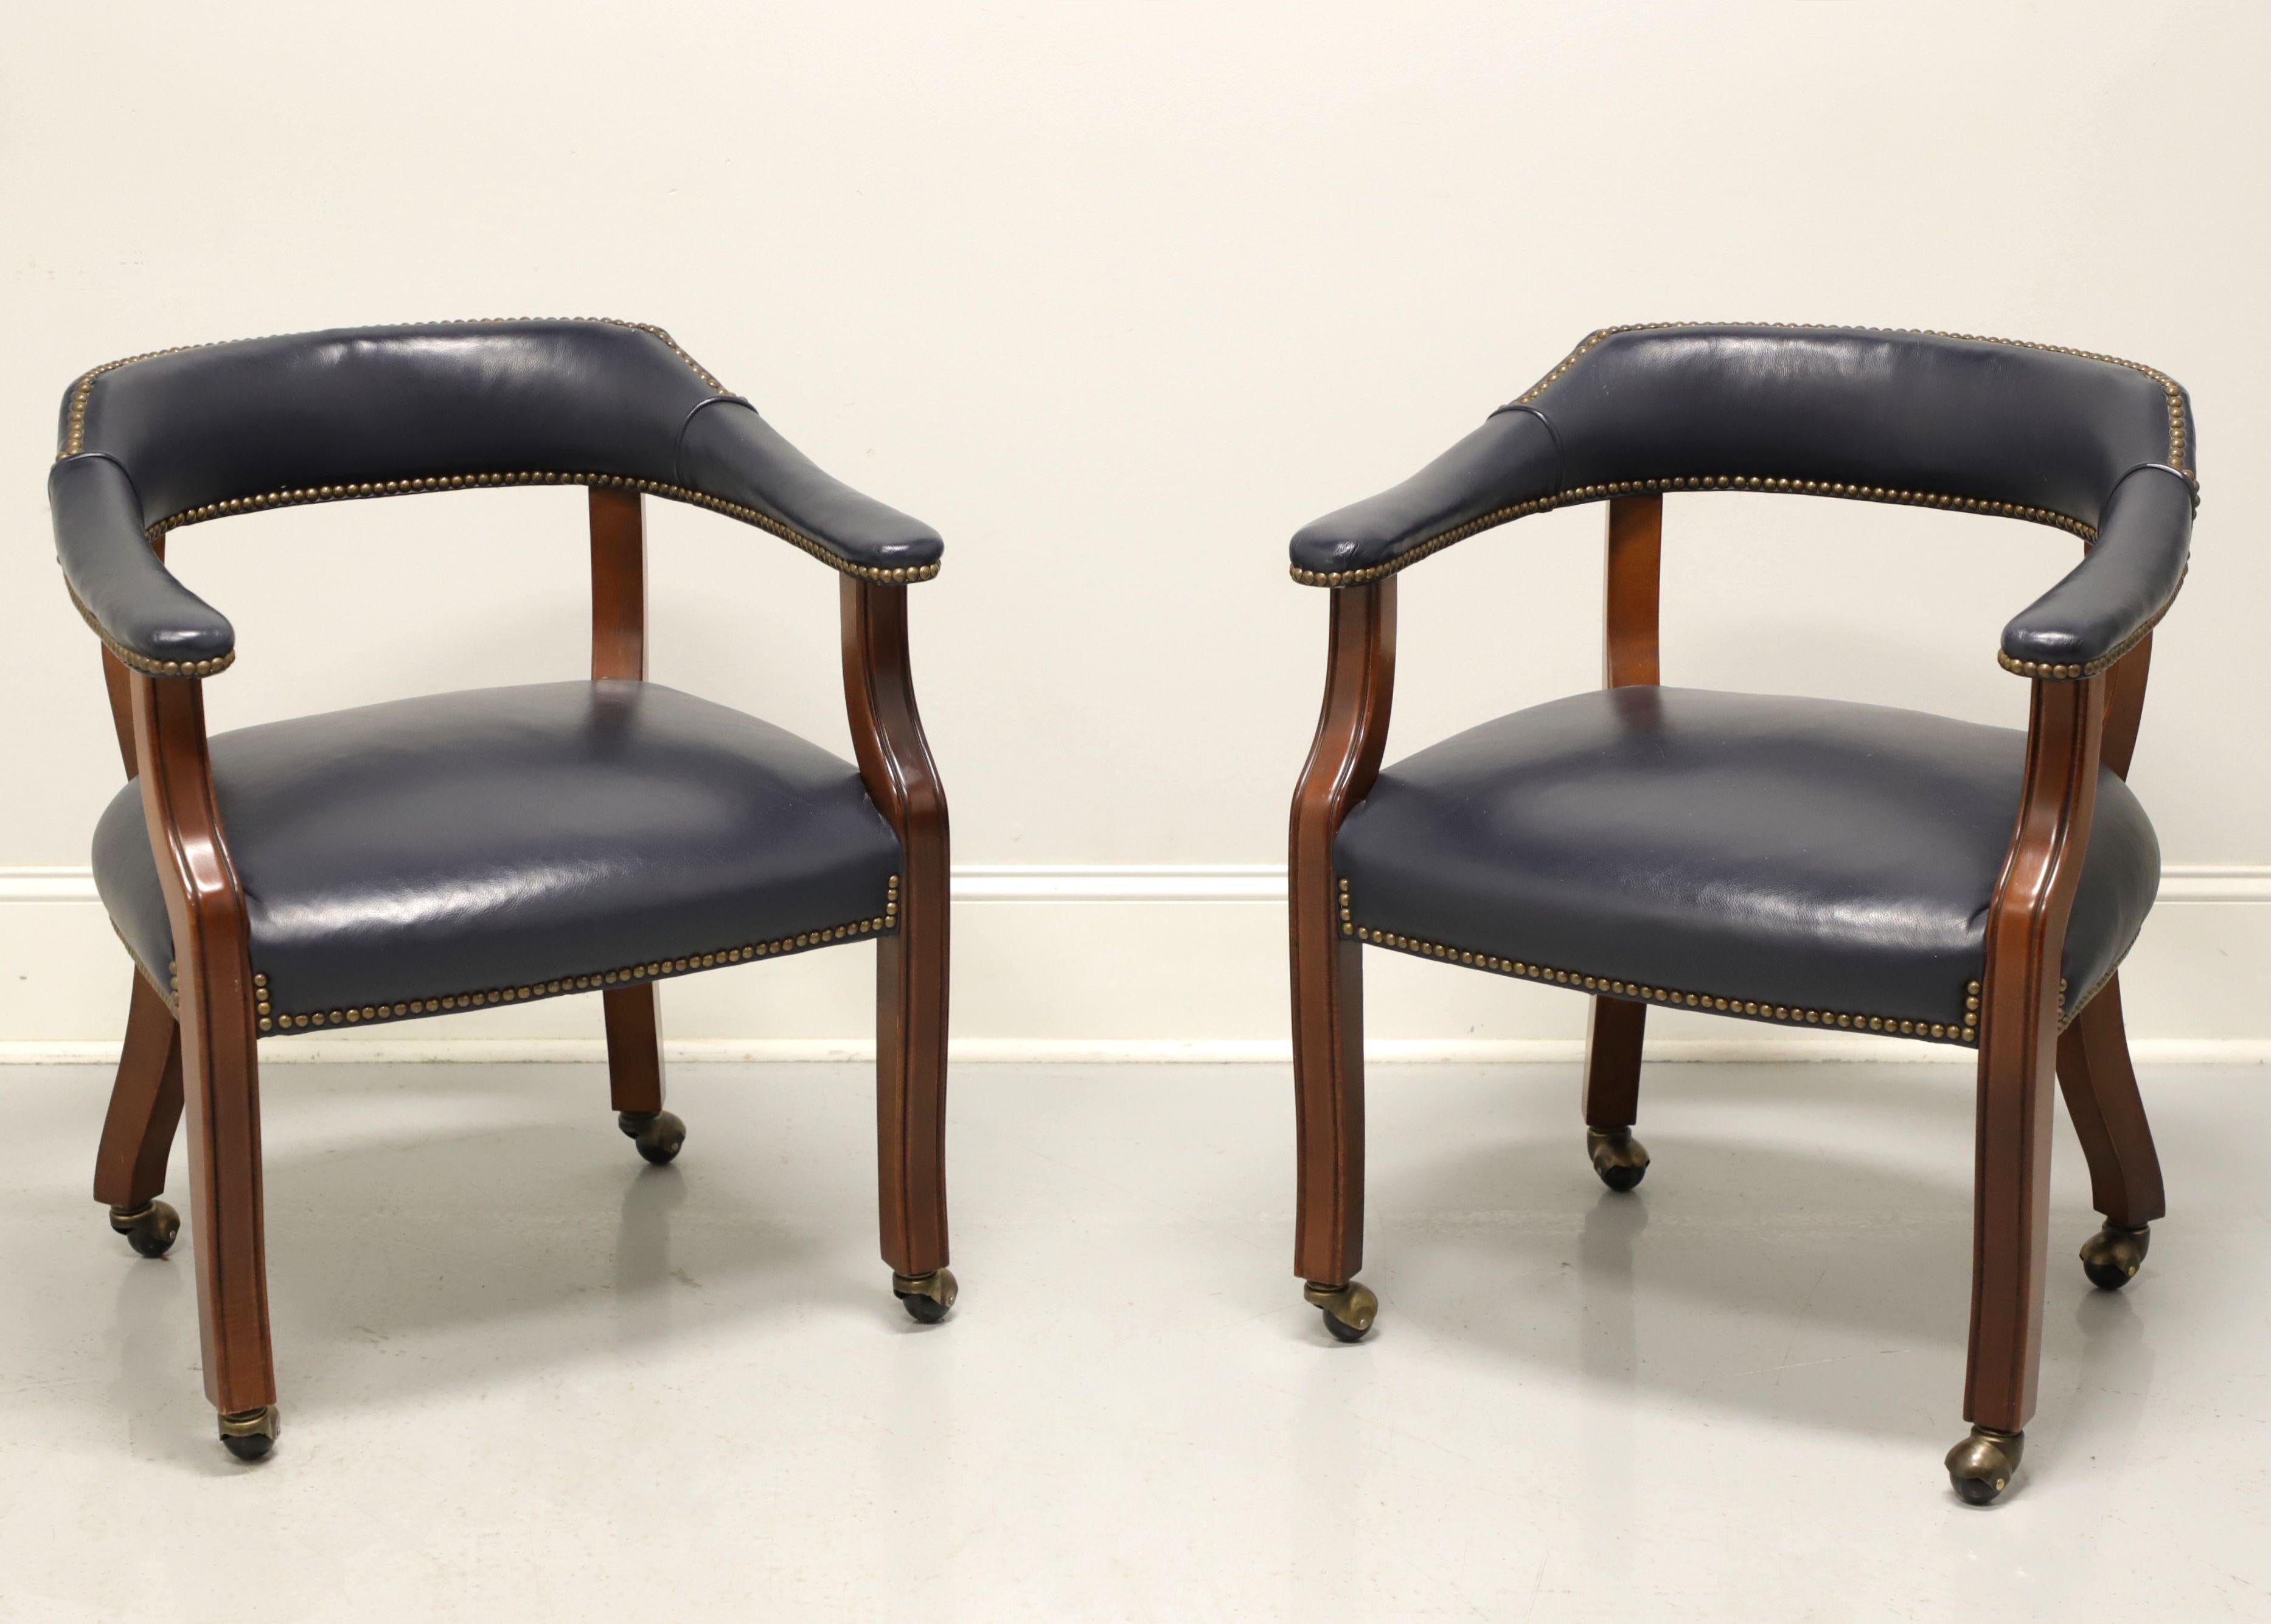 GORDON’S Late 20th Century Leather Club Chairs on Casters - Pair A 5